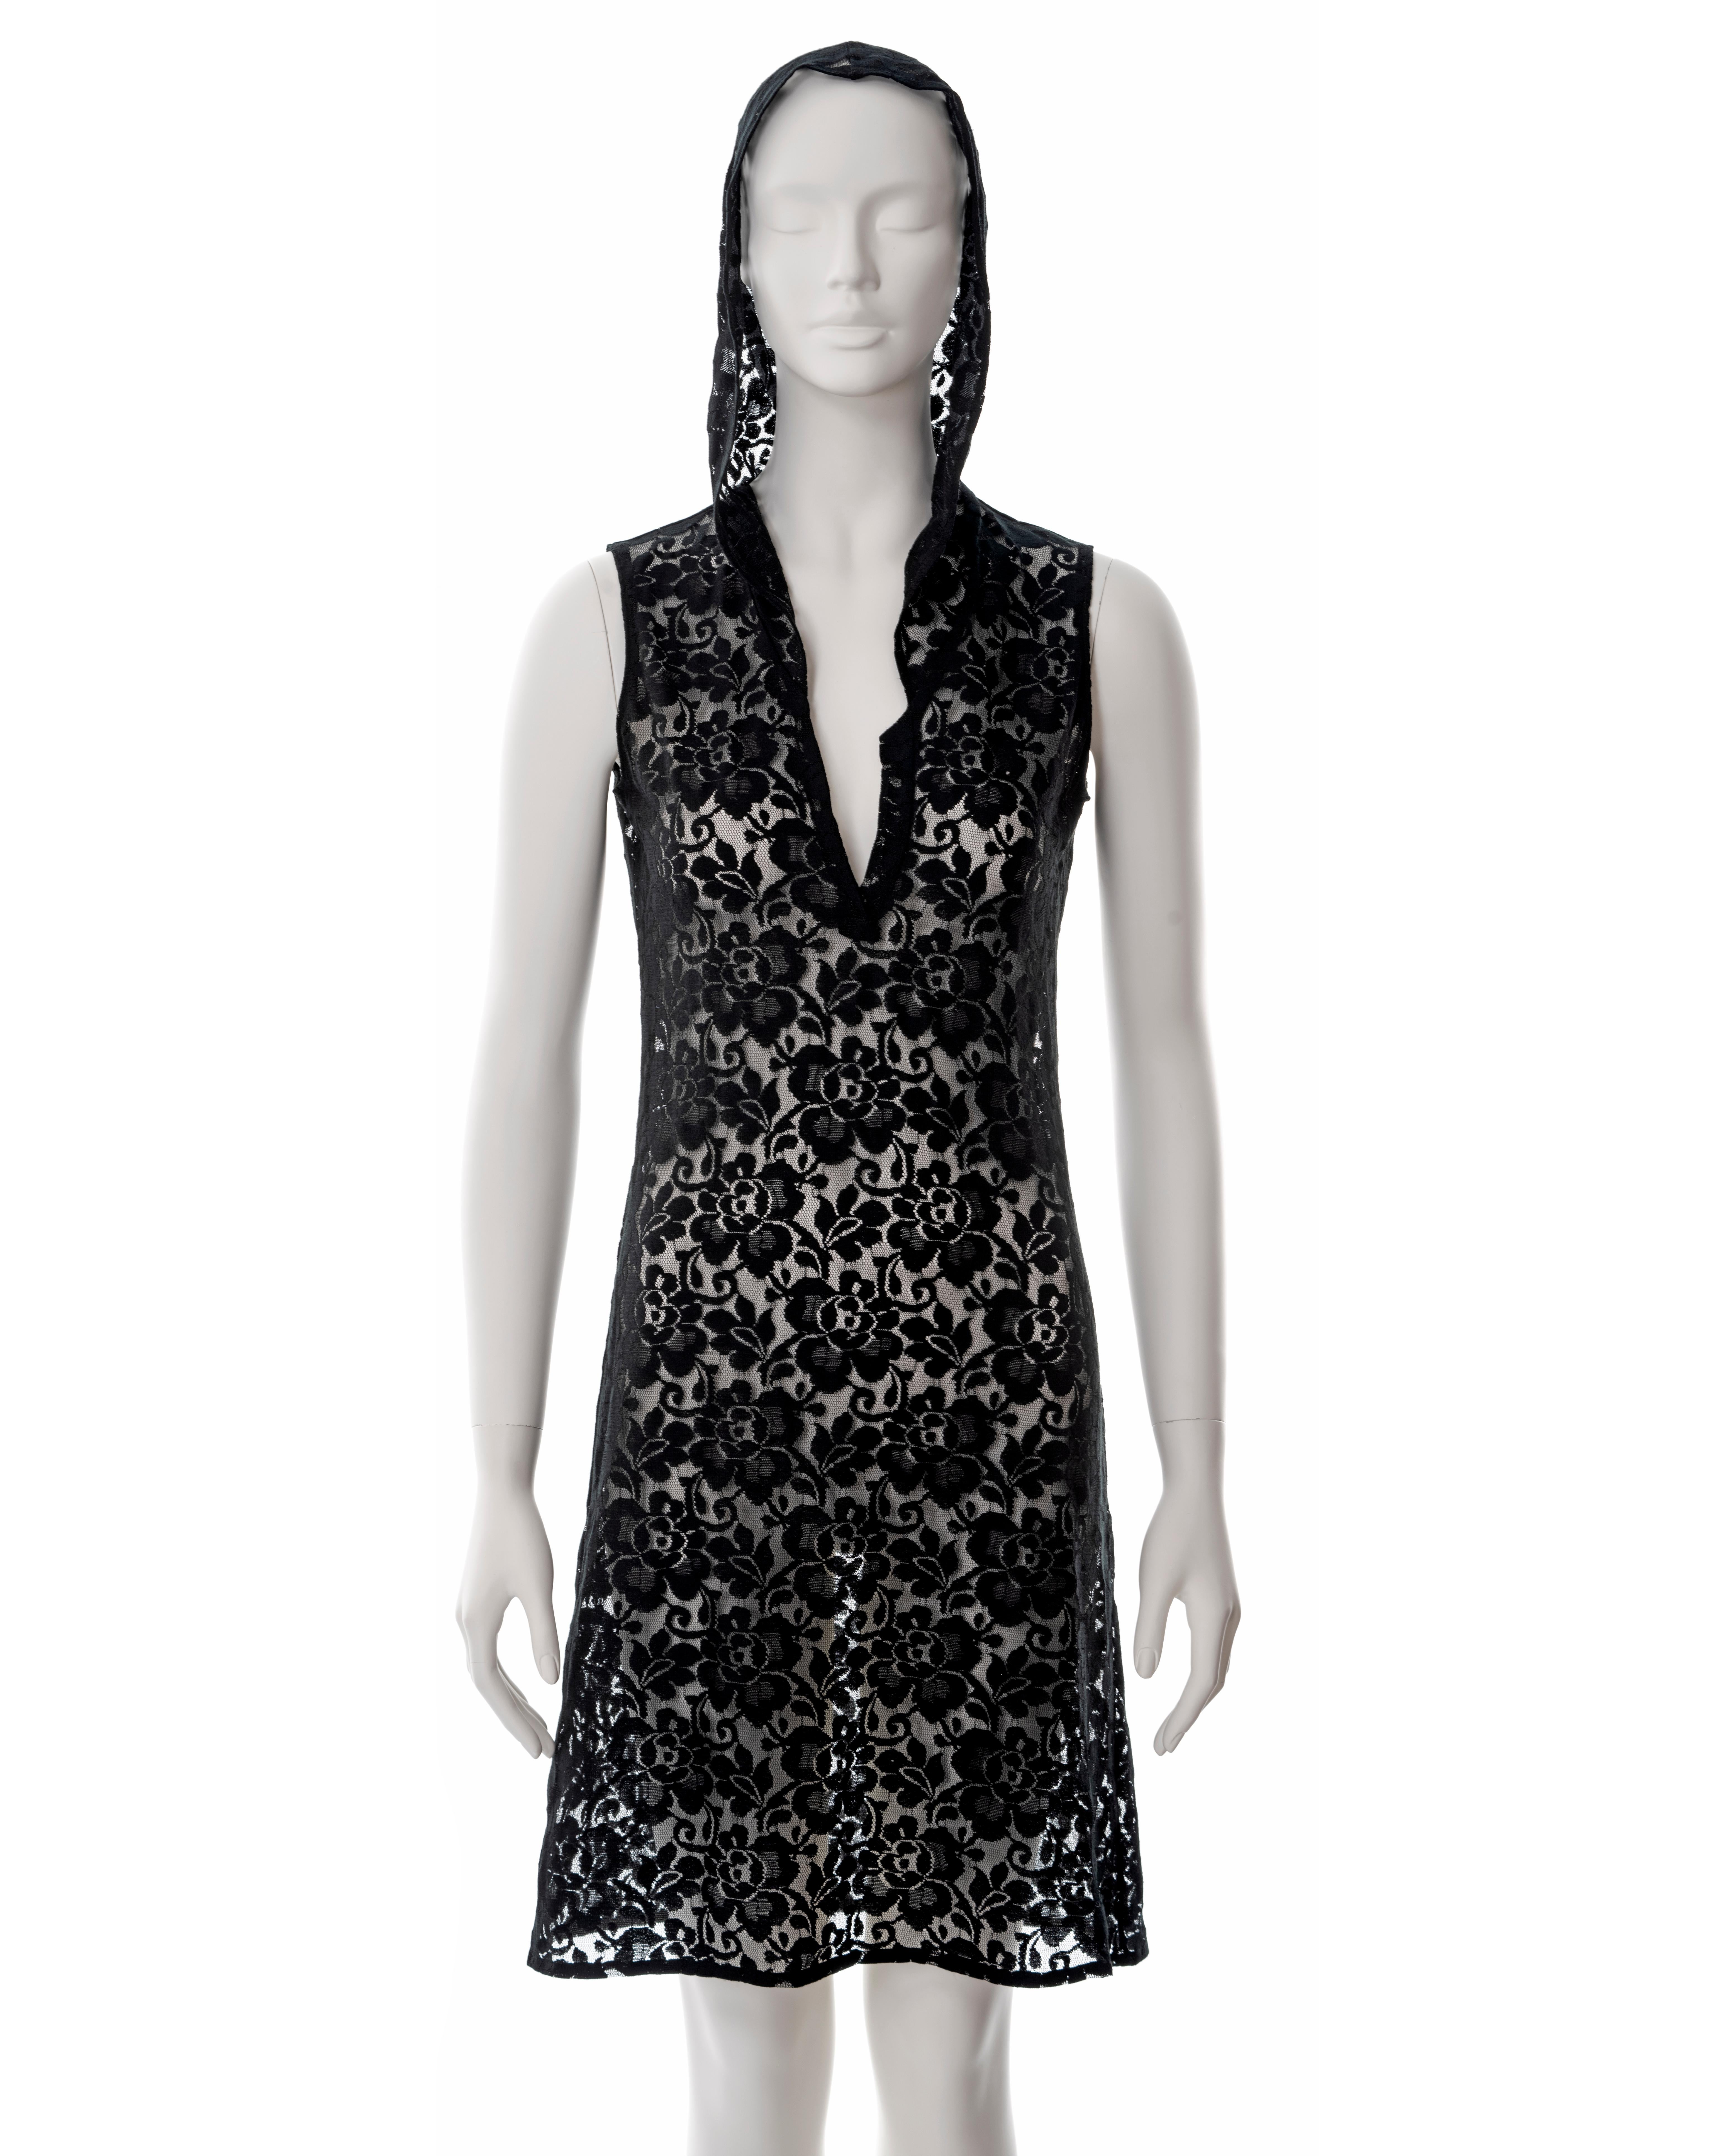 ▪ Helmut Lang black lace hooded shift dress
▪ Sold by One of a Kind Archive
▪ Spring-Summer 1996
▪ V-neck
▪ Knee length
▪ Approx. size Small
▪ Made in Italy  

All photographs in this listing EXCLUDING any reference or runway imagery needs the